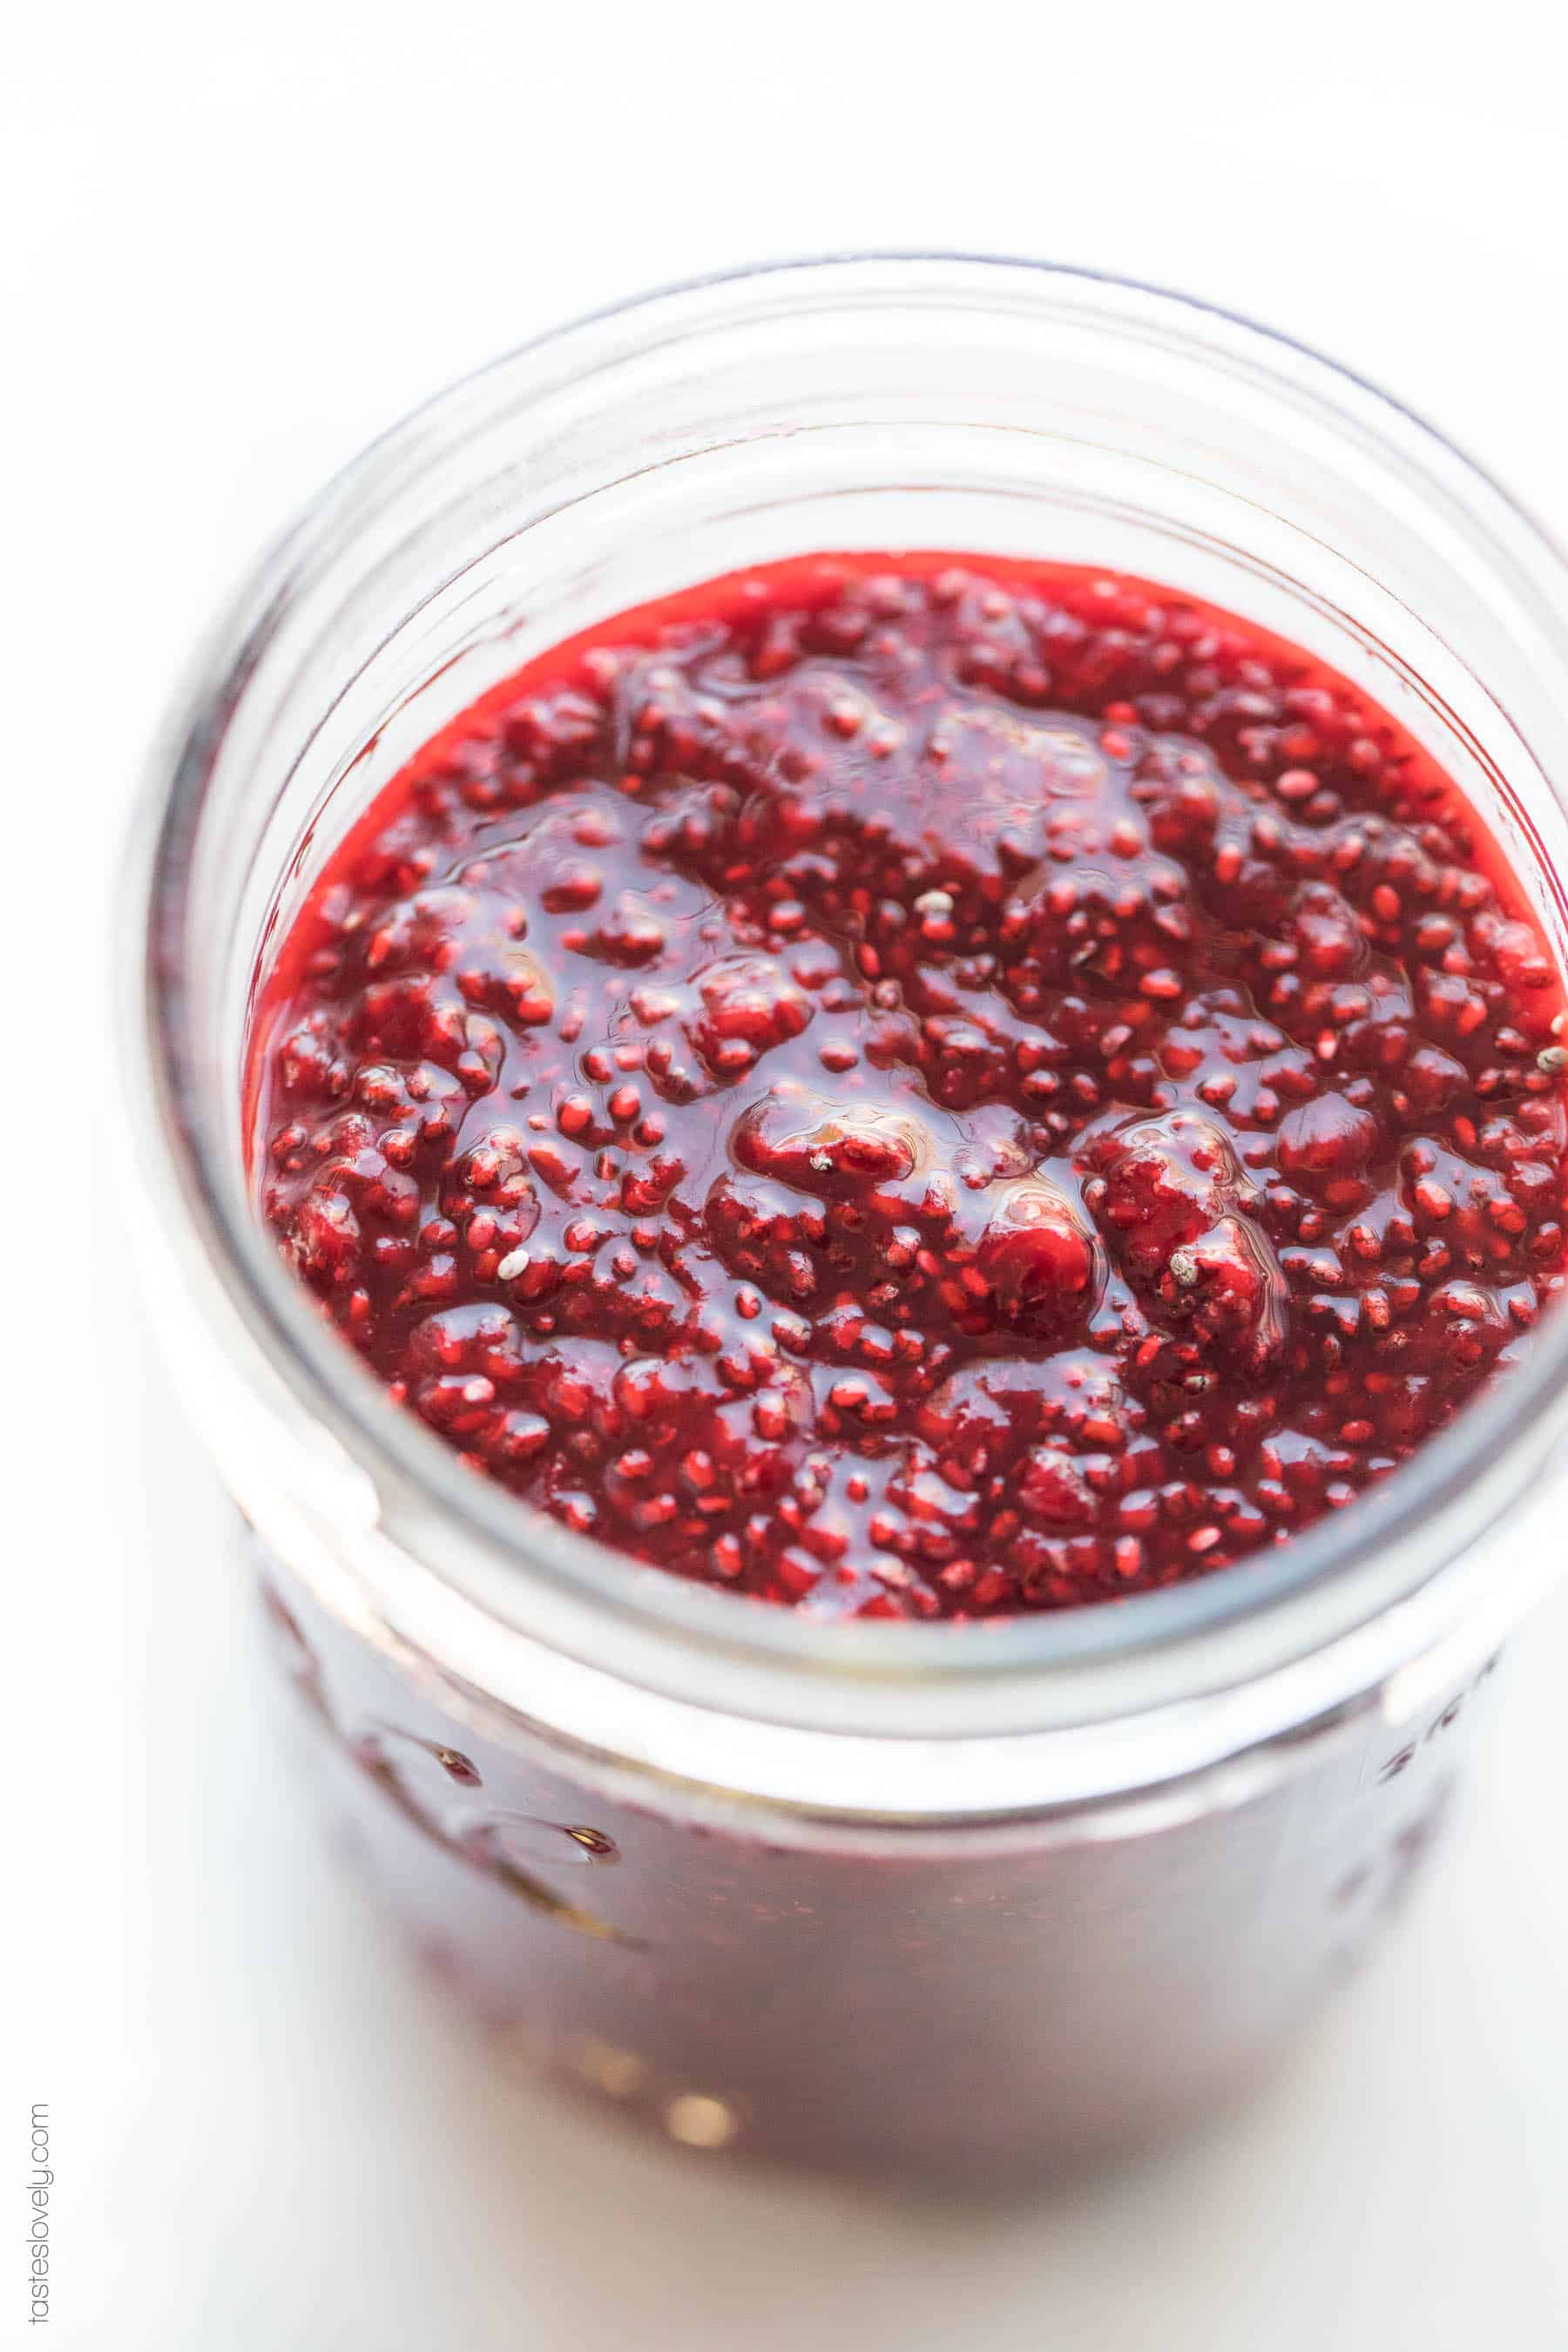 Paleo Chia Seed Jam with Frozen Berries - use any frozen berry! Sweetened with coconut sugar and freezer friendly.